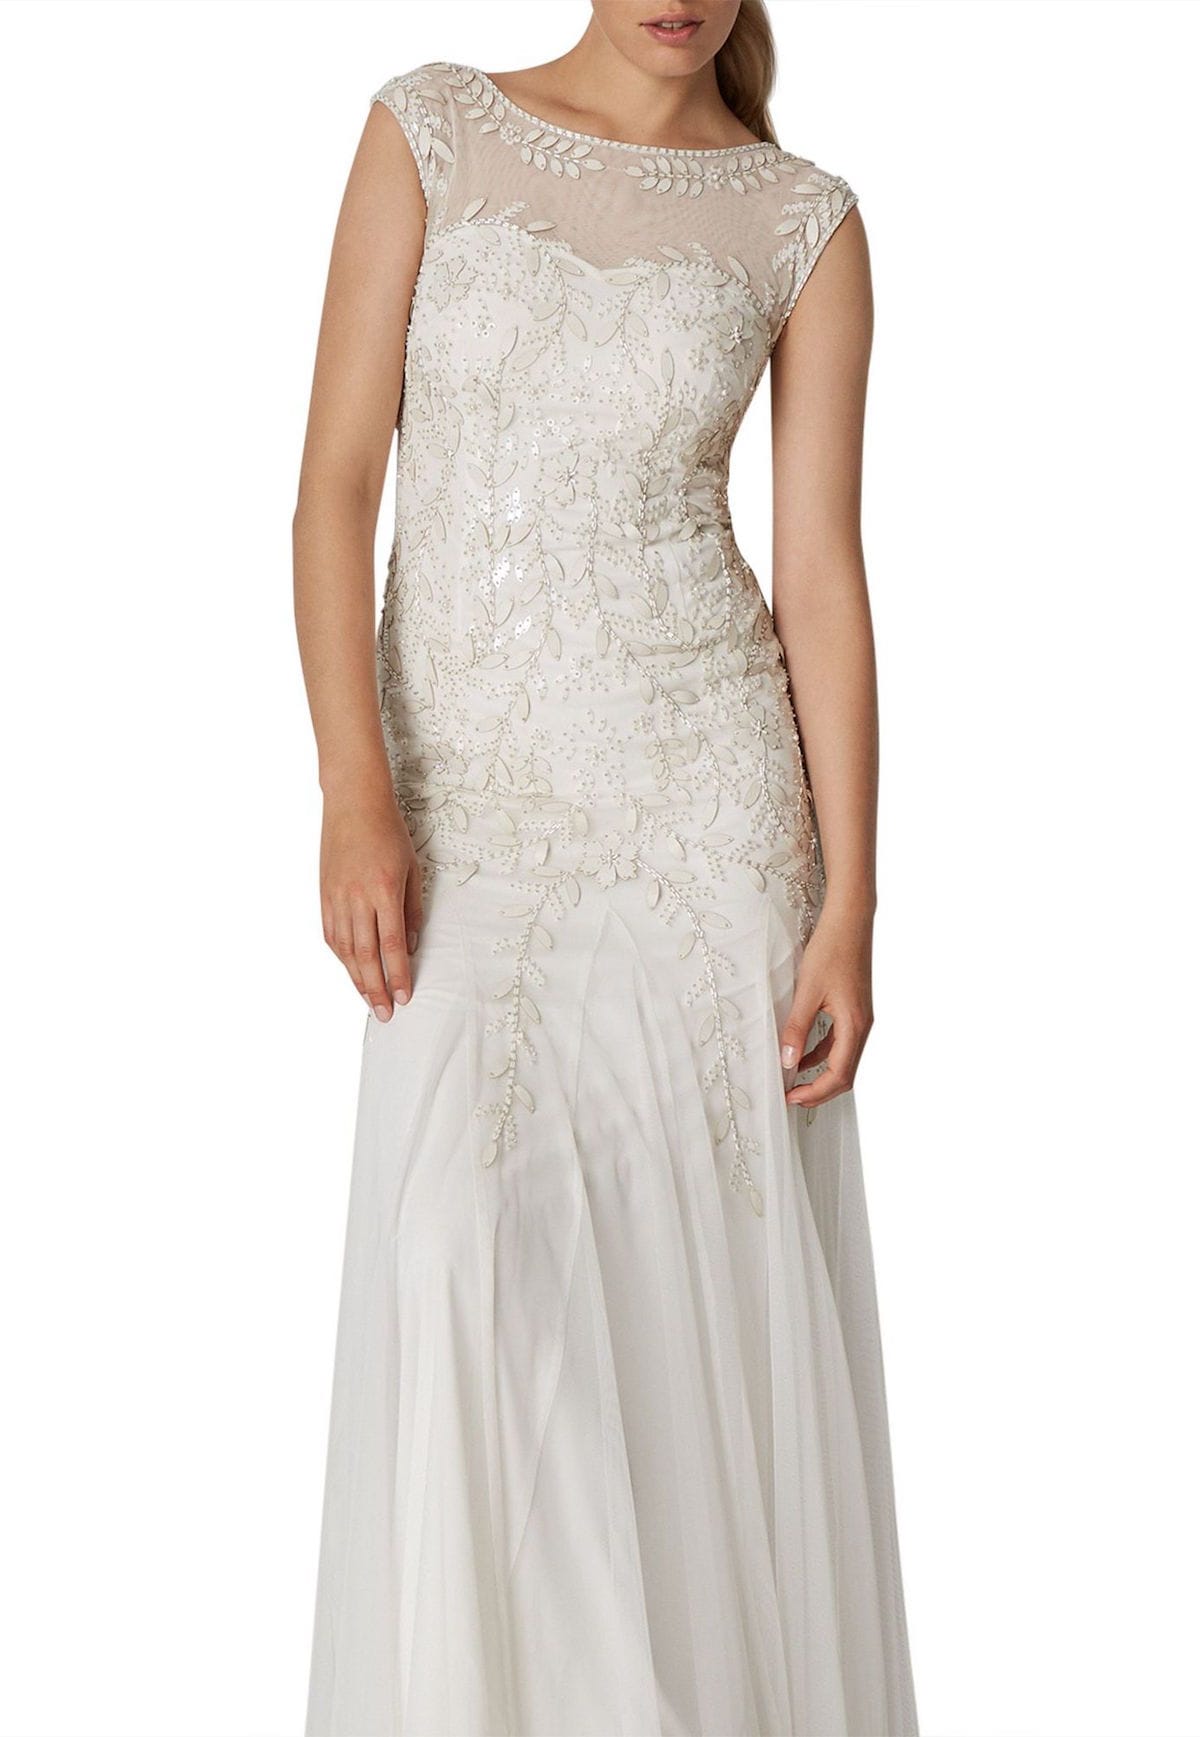 10 Dreamy Wedding  Dresses  Under   500  from House of Fraser 